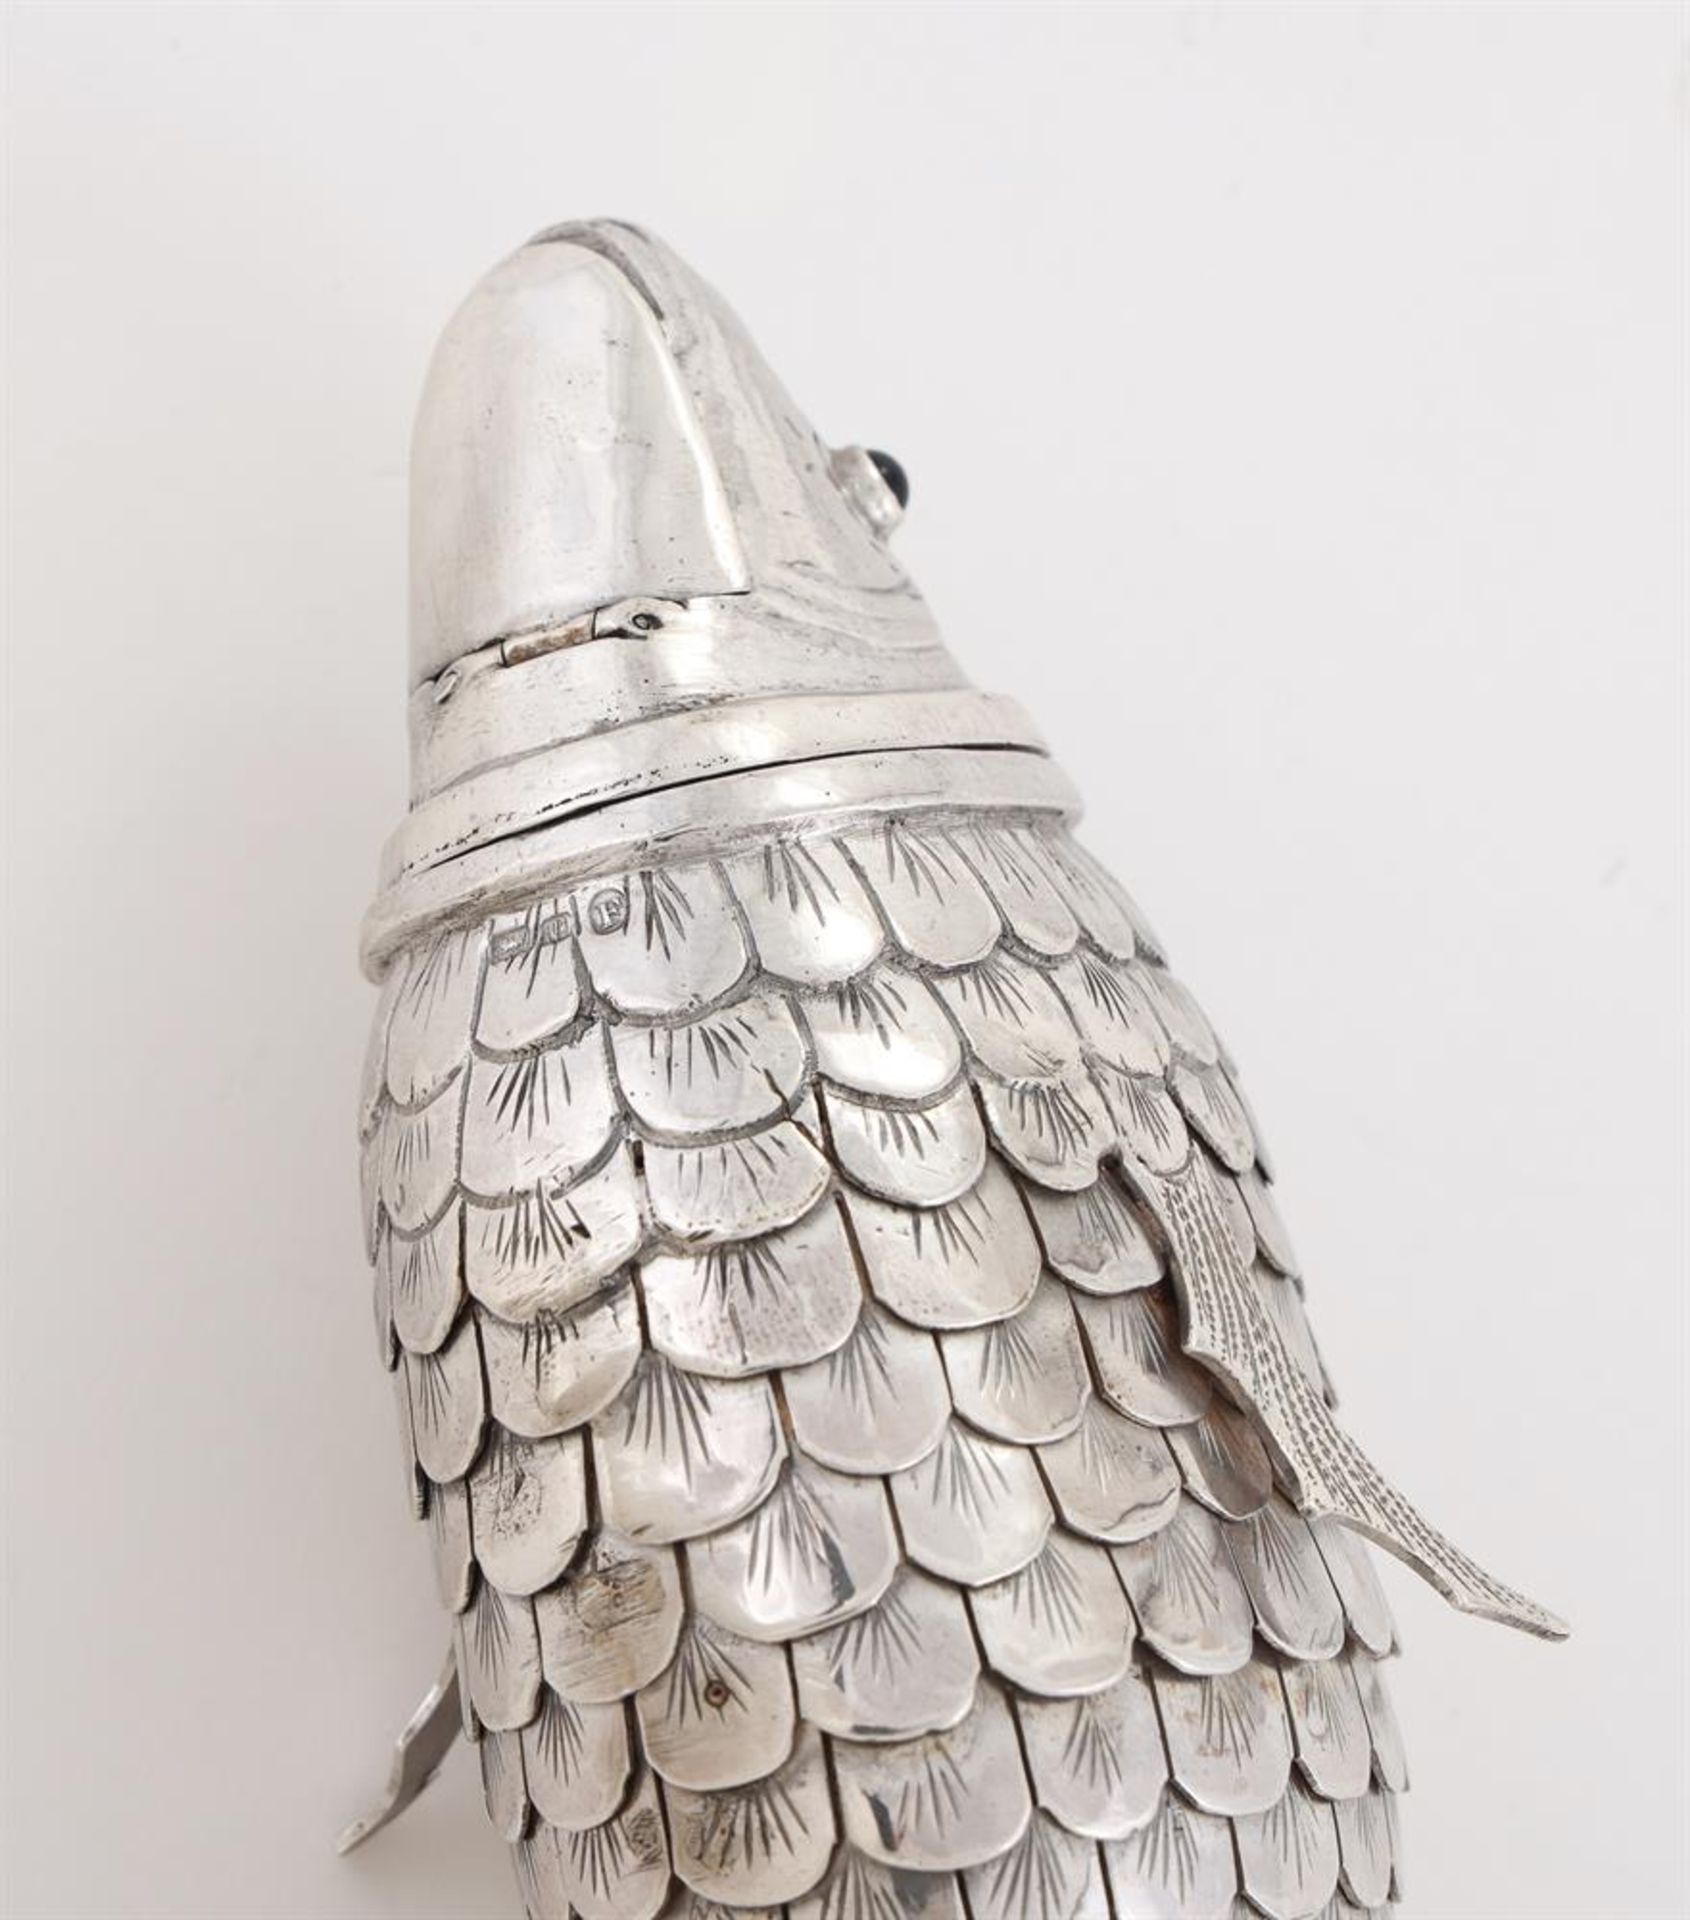 A SILVER ARTICULATED FISH BOX, SPONSOR'S MARK FOR I. S. GREENBERG & CO. - Image 2 of 3